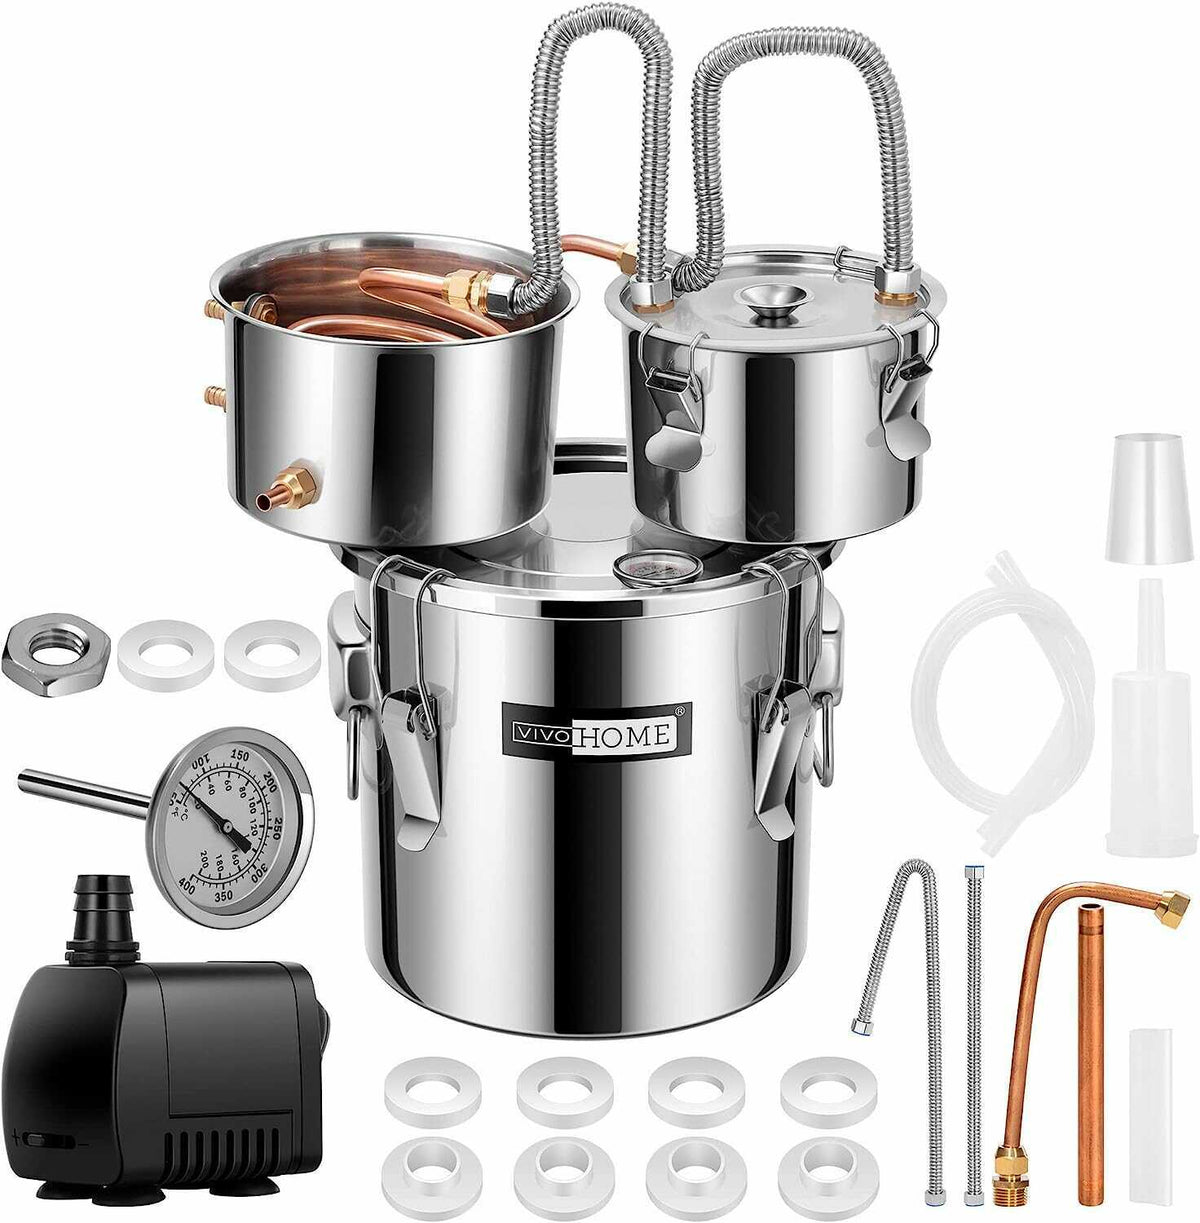 VIVOHOME Alcohol Still Stainless Steel Pots Home Brewing Kit with Built-in Thermometer